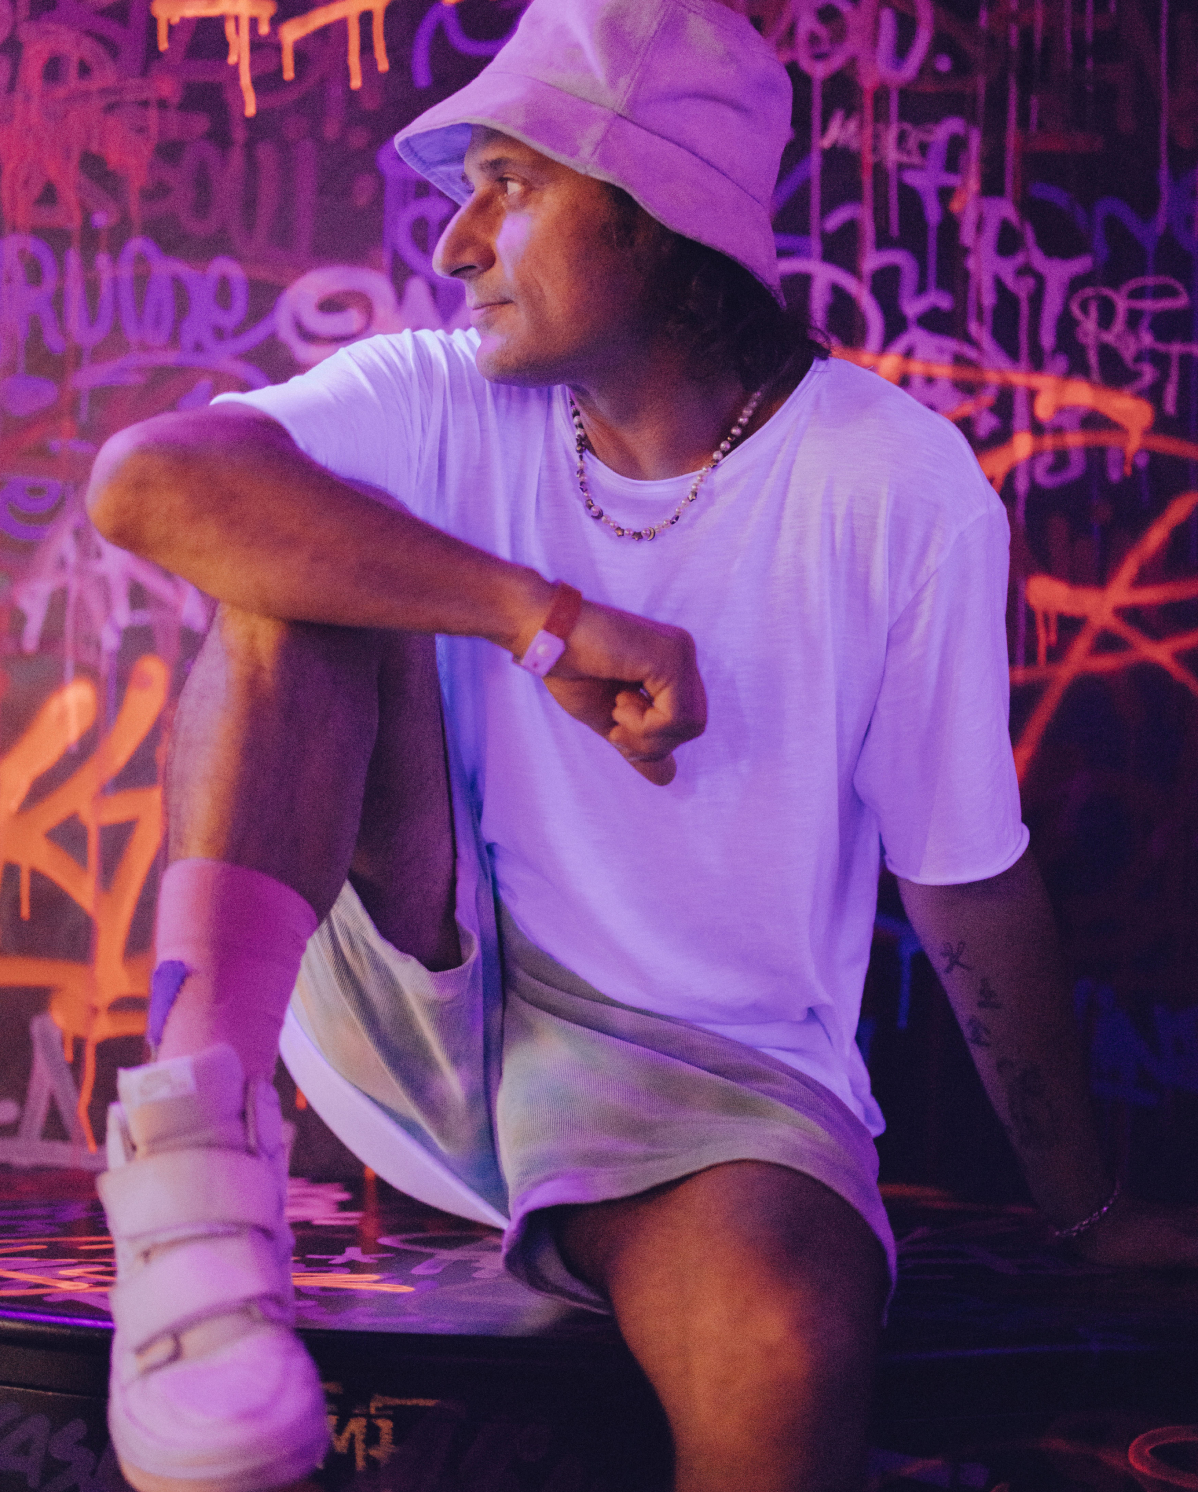 A person wearing a lavender bucket hat, white t-shirt, pastel shorts, and white chunky sneakers sits on a surface with one leg bent and the other hanging off. They are in a dimly lit room with vibrant graffiti-covered walls and neon lighting.